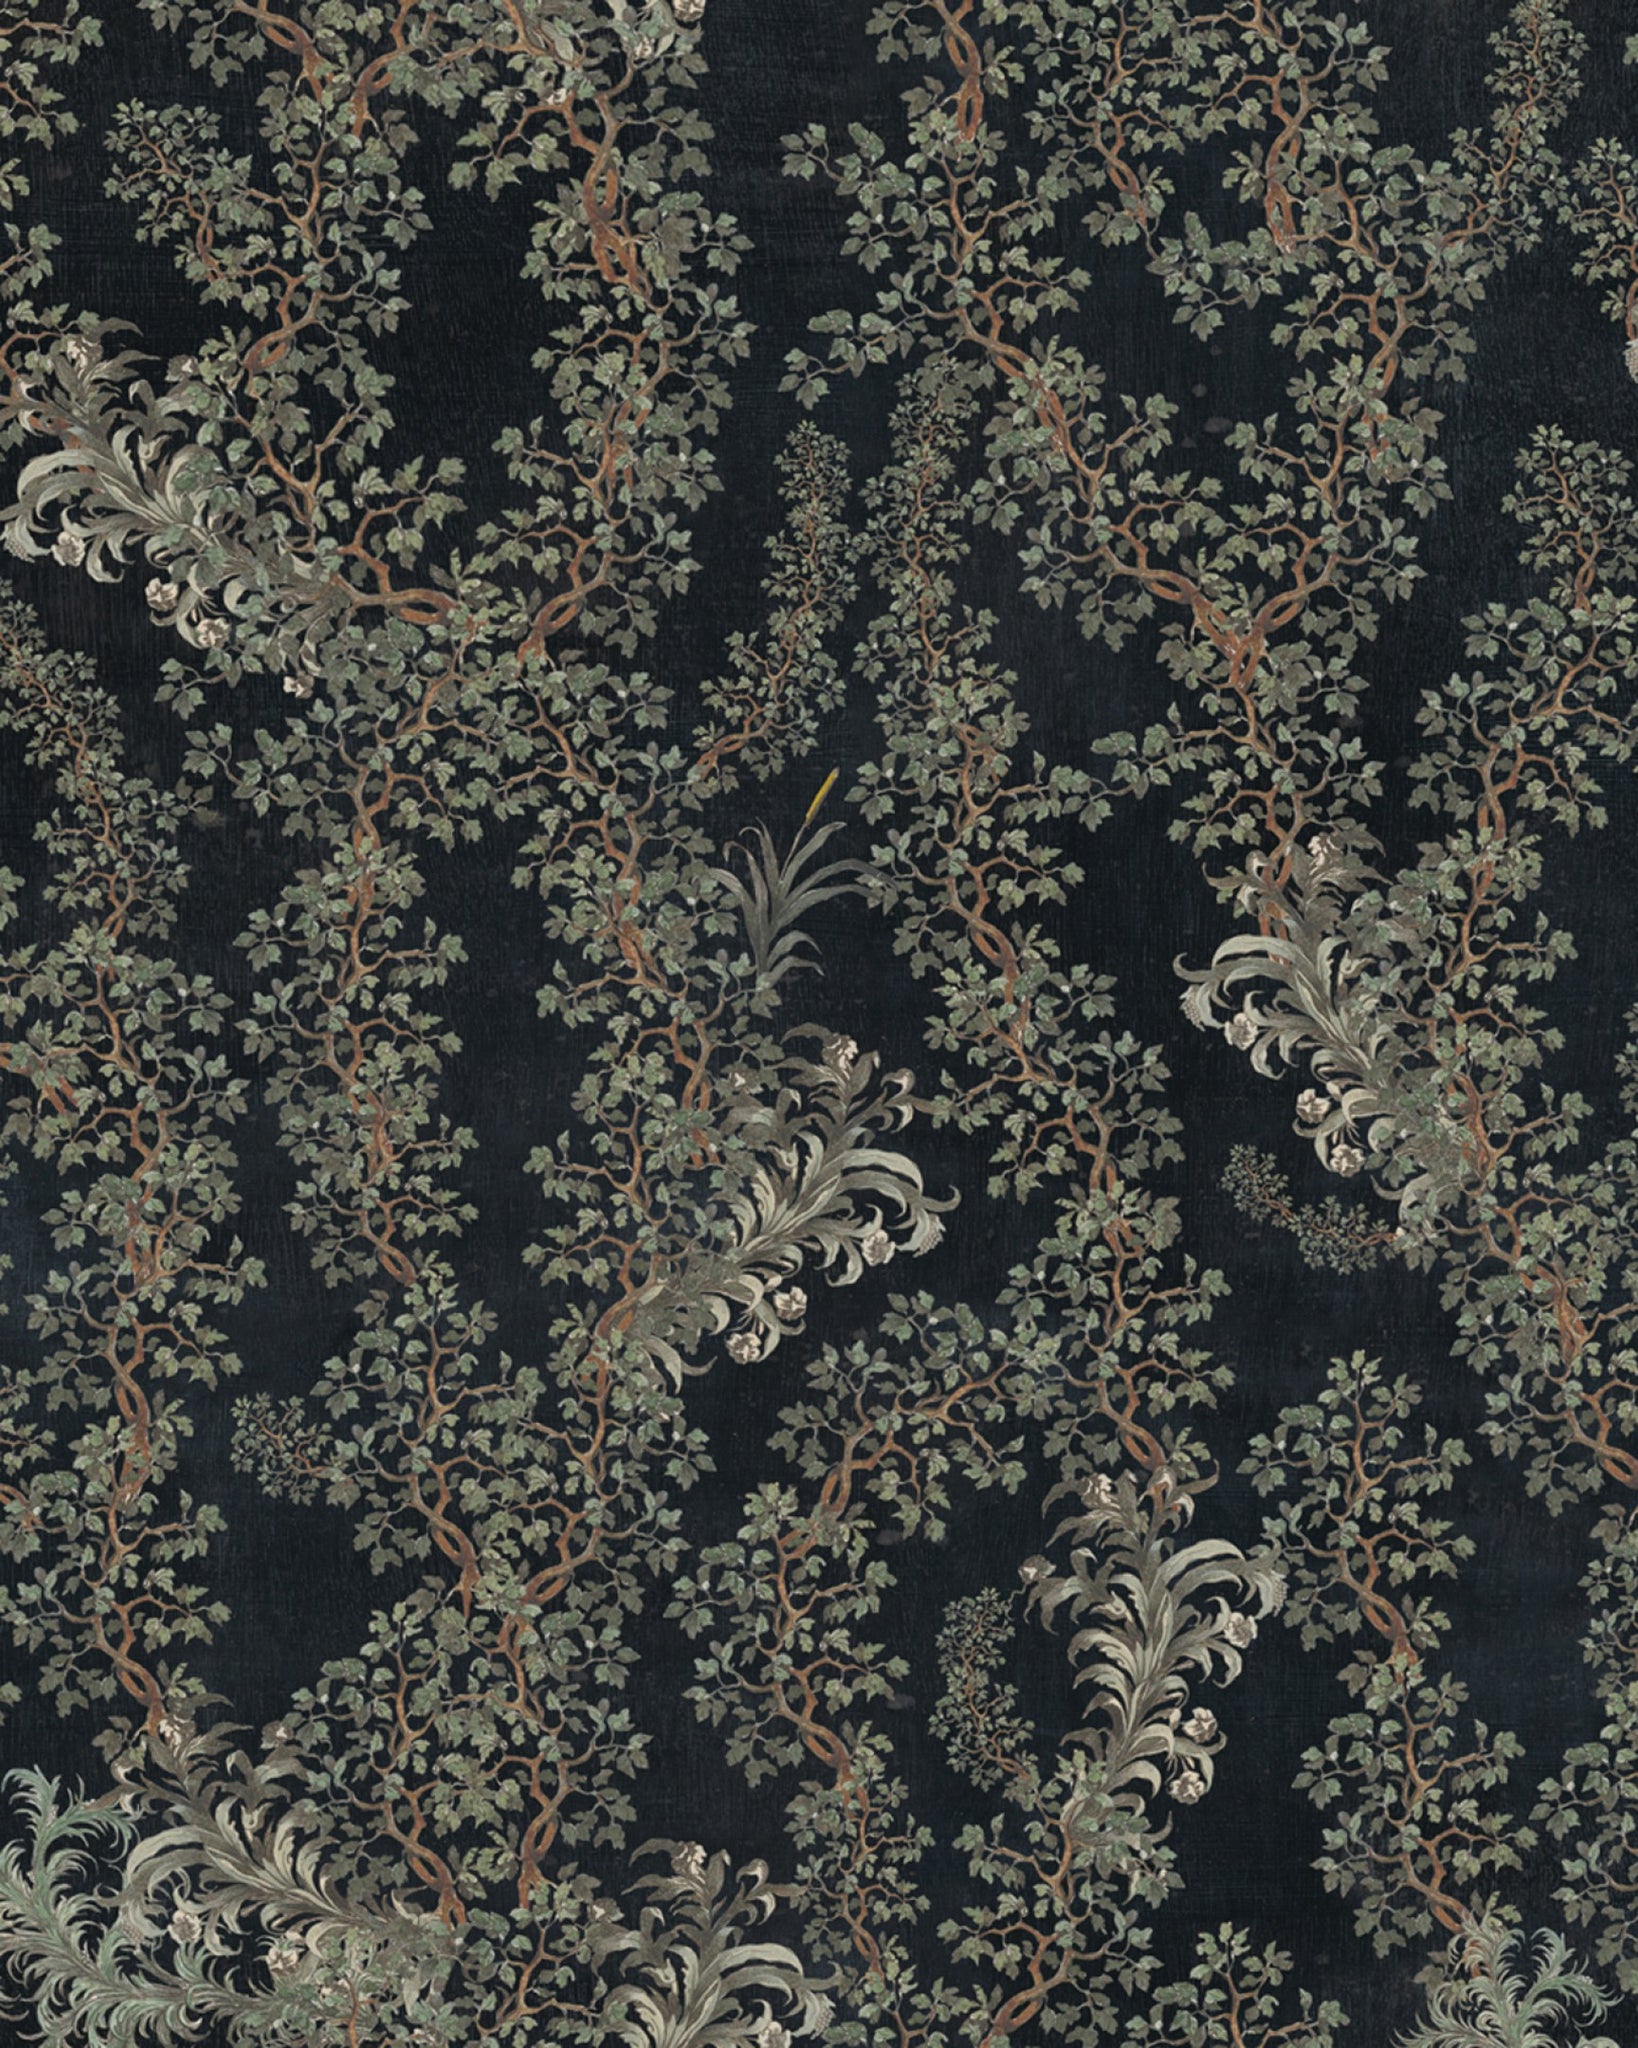 Dark Leaves Wallpaper From The Wallpaper Compendium Collection By Mind Burke Decor